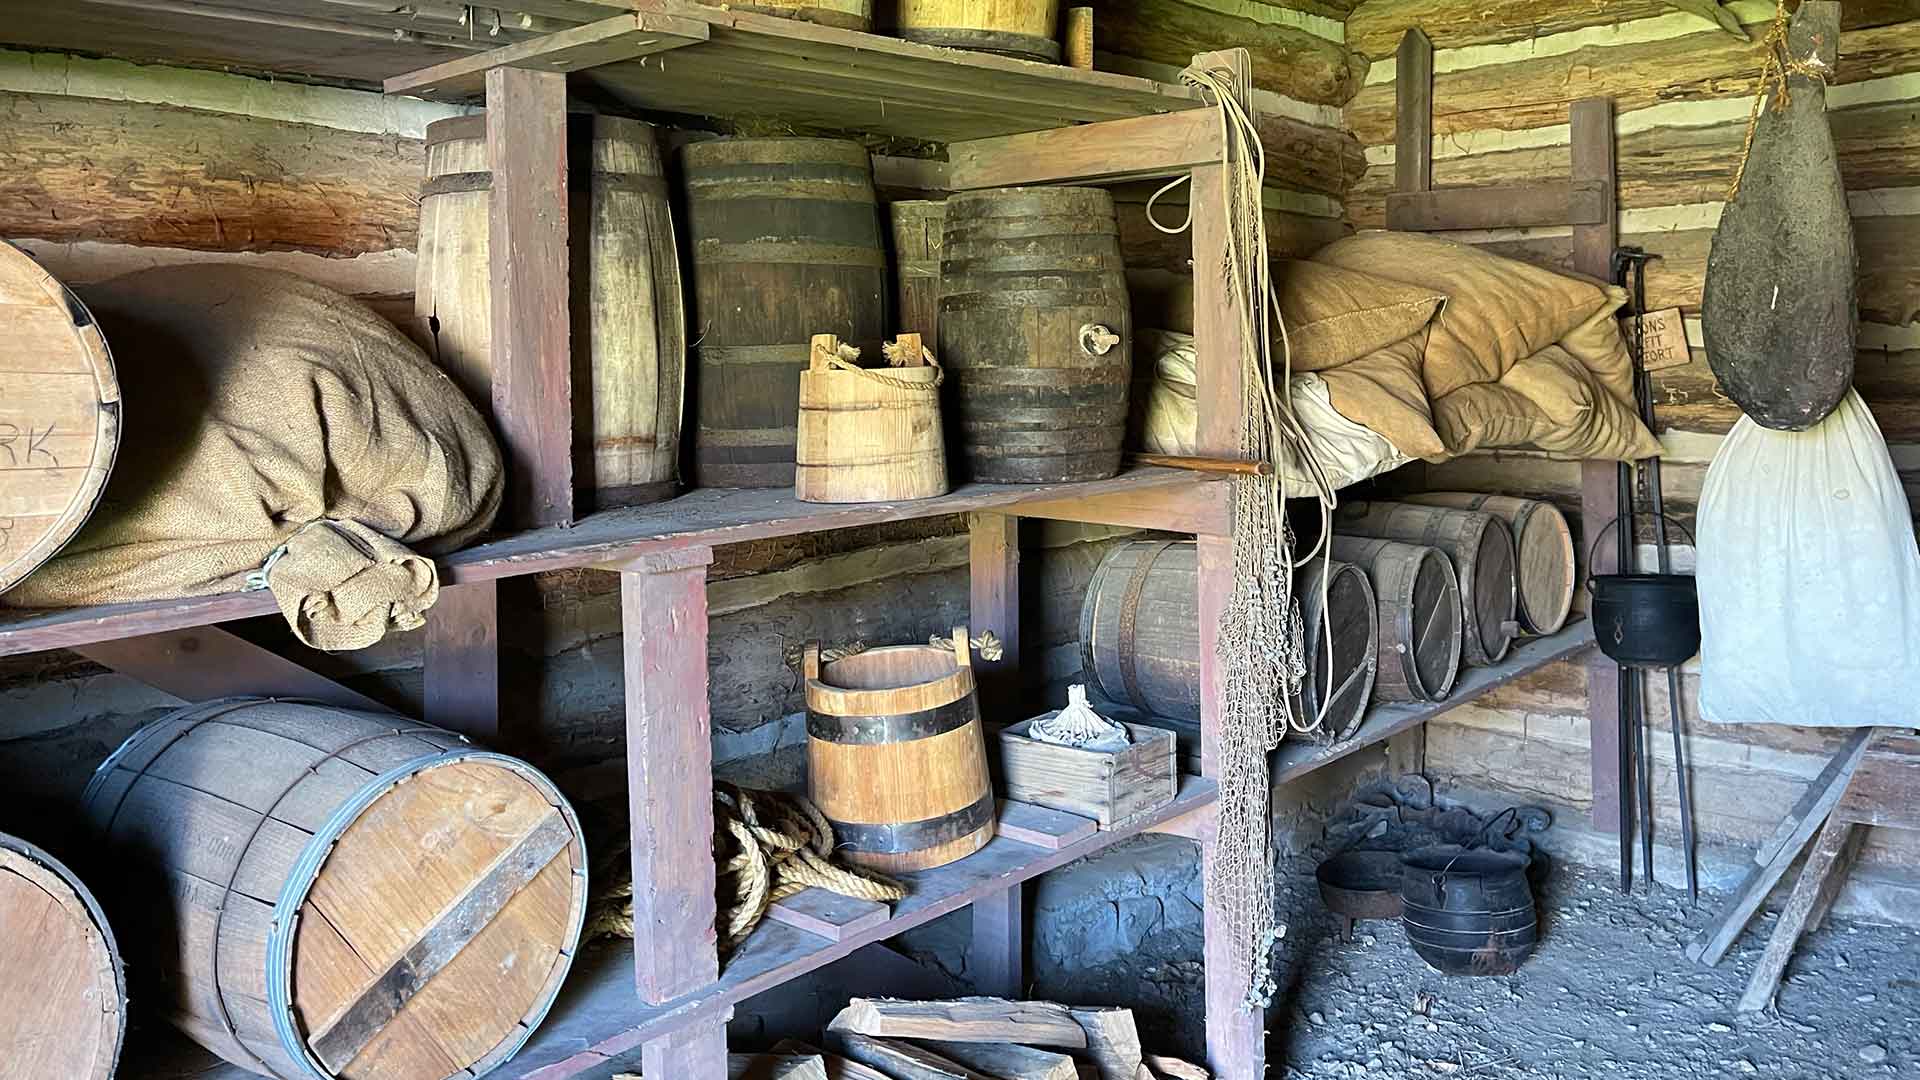 view inside storehouse at Fort Roberdeau